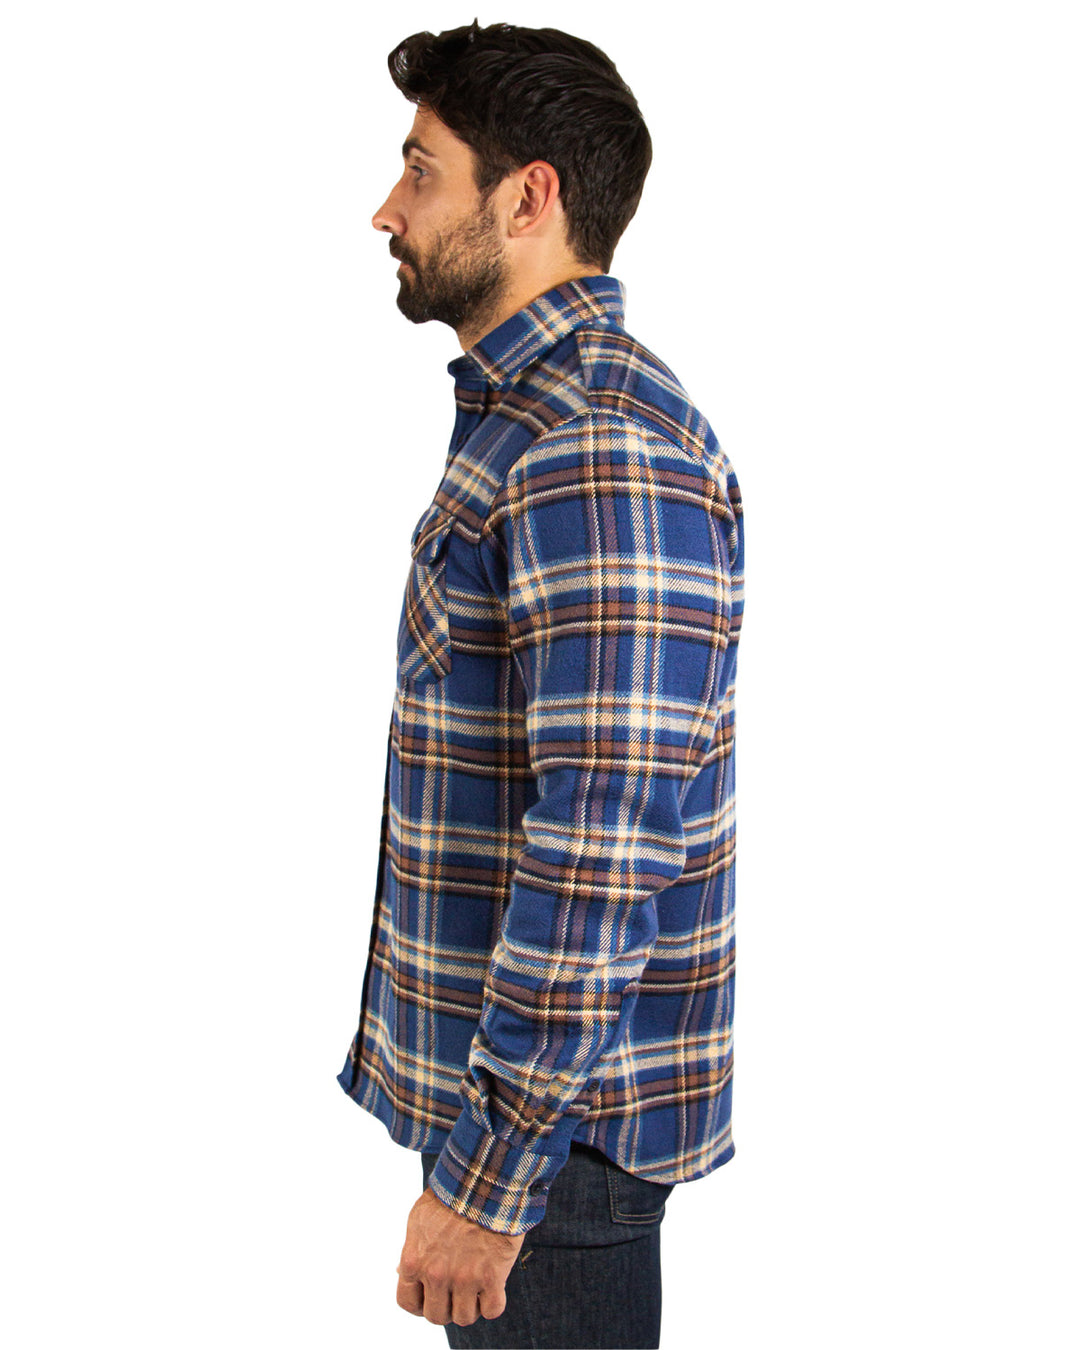 Relaxed Fit Heavywelght Flannel Shirt for Men by Muskox Flannels, Thick 100% Cotton Flannel Shirt in Moss